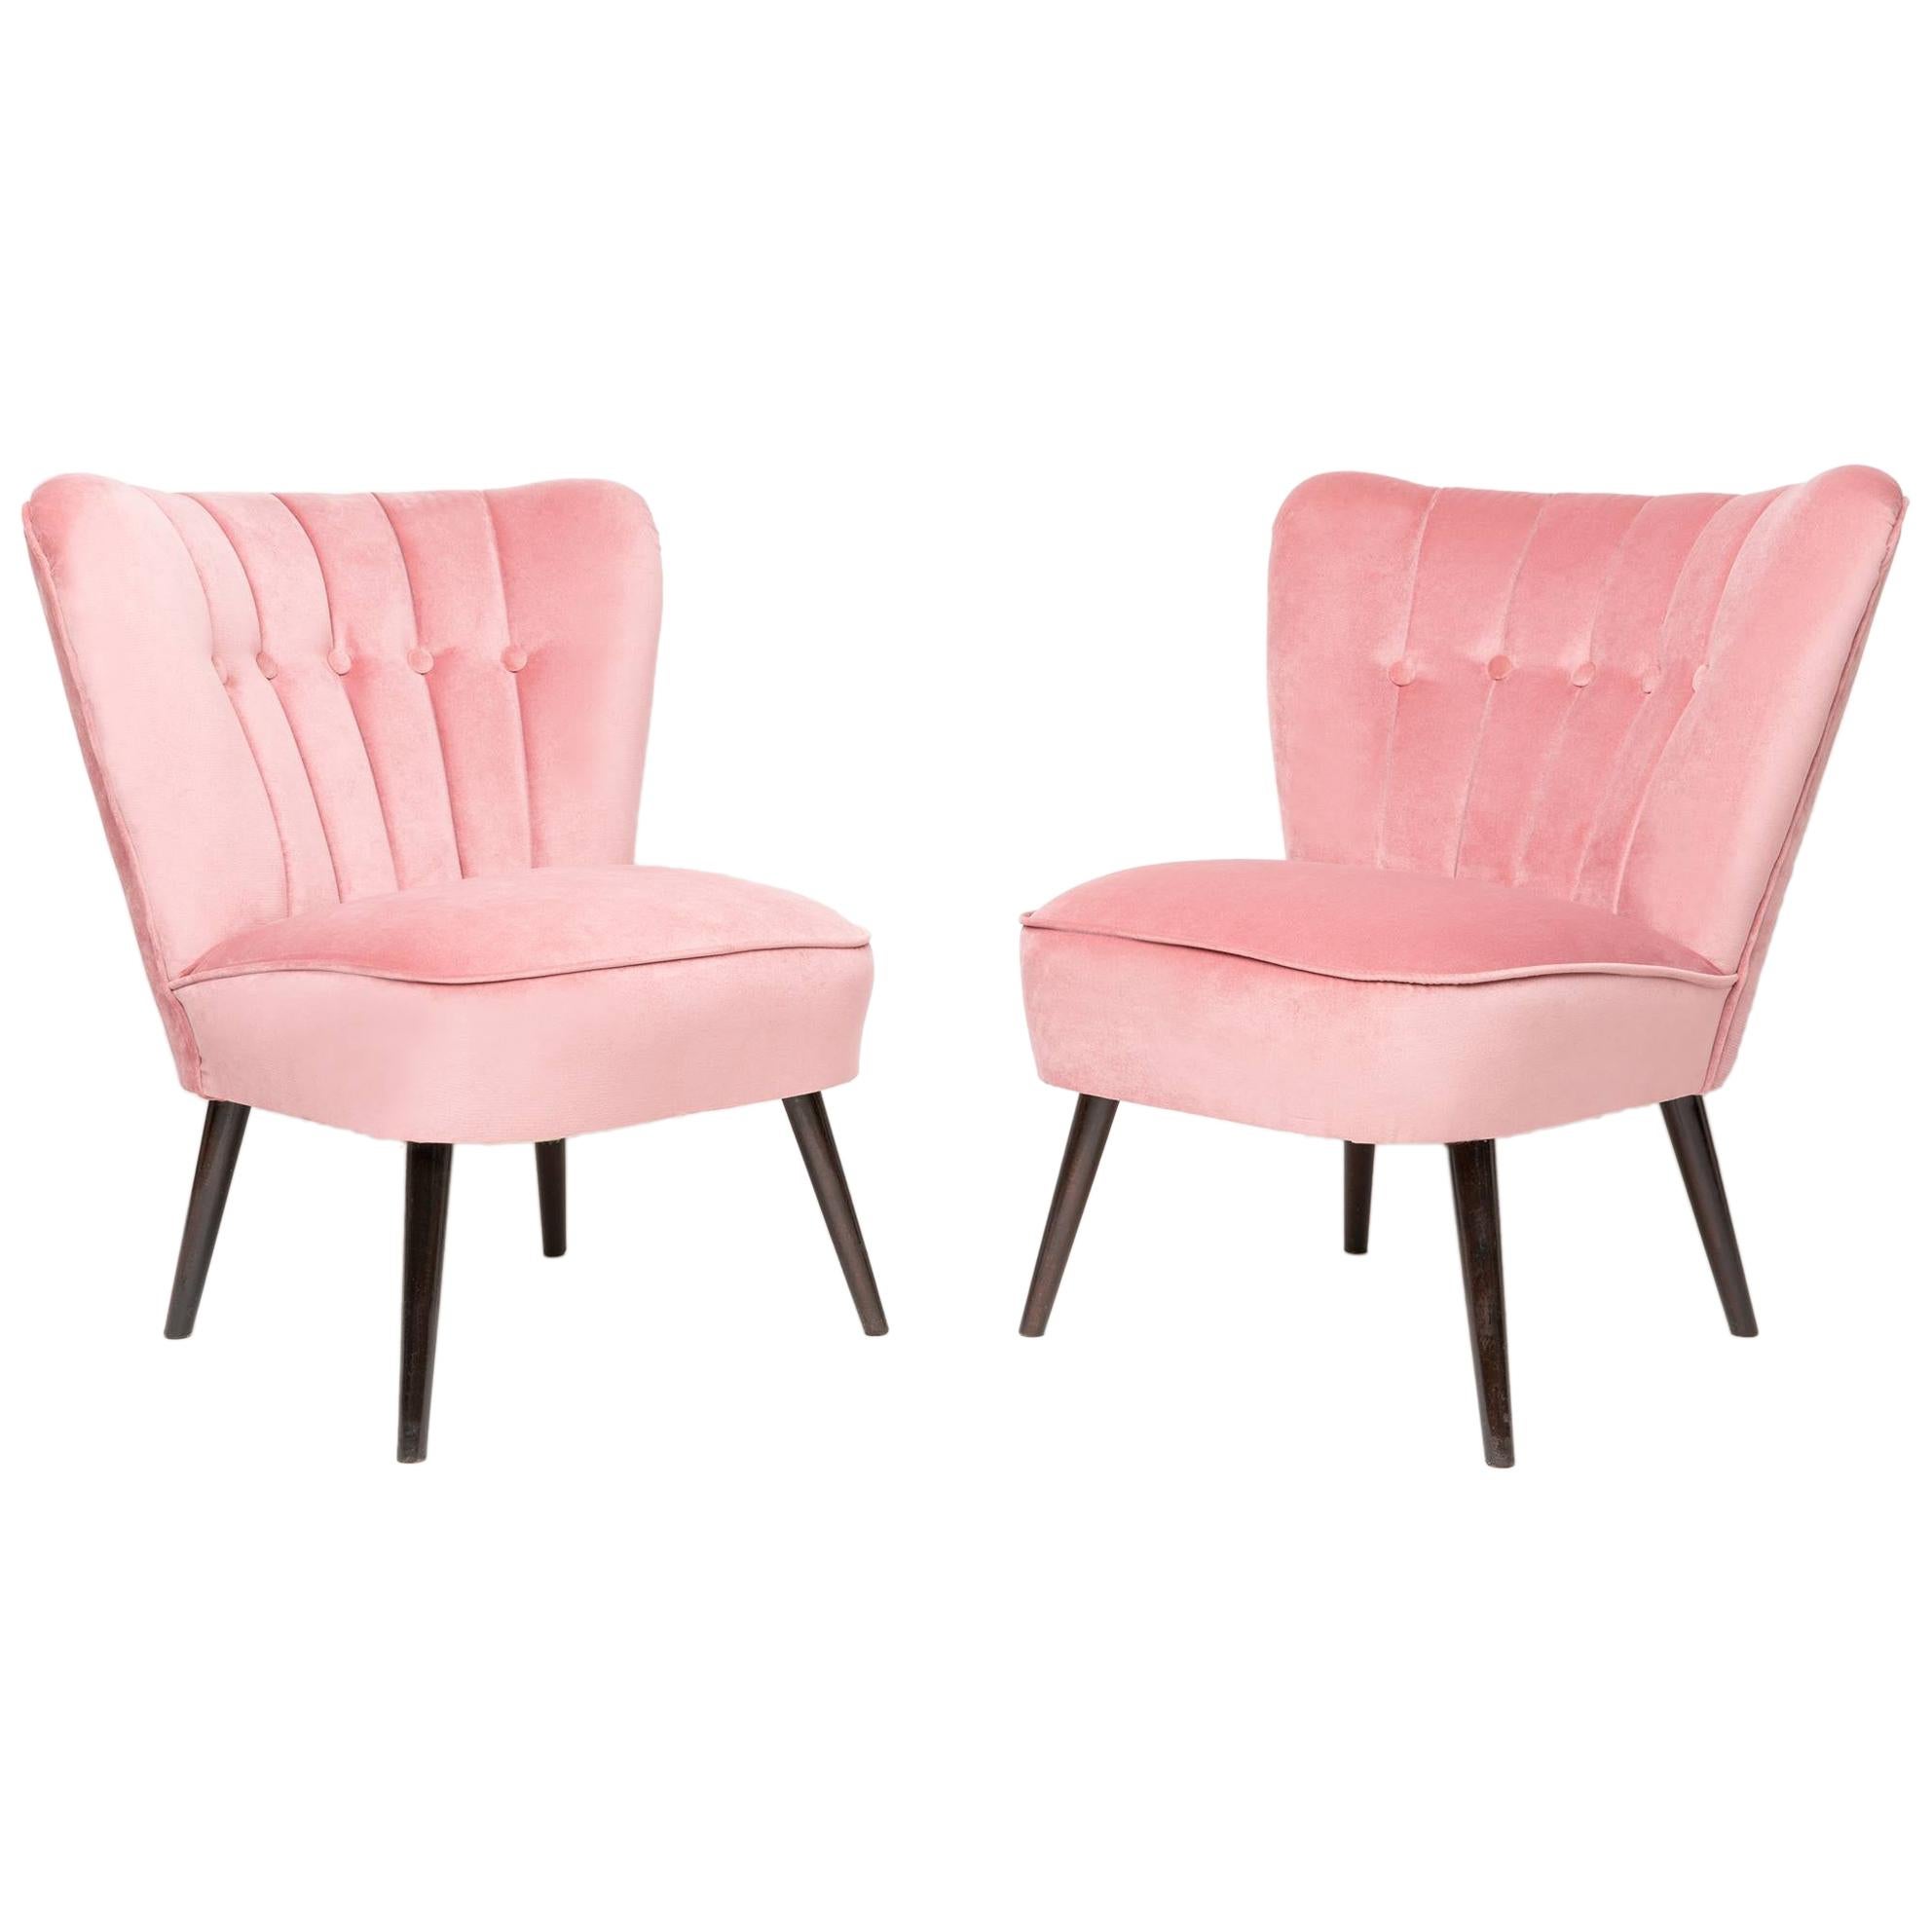 Set of Two 20th Century Pink Velvet Club Armchairs, Germany, 1960s